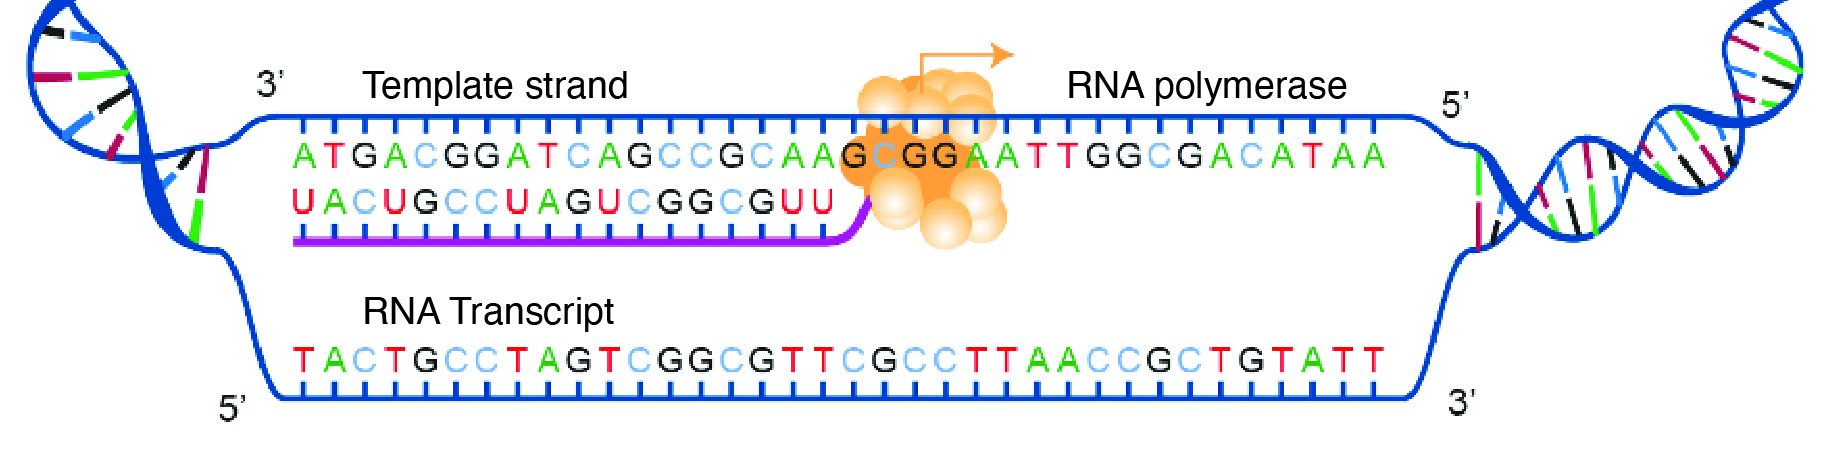 DNA strands pulled apart making space for RNA polymerase to form mRNA using 1 DNA template strand.